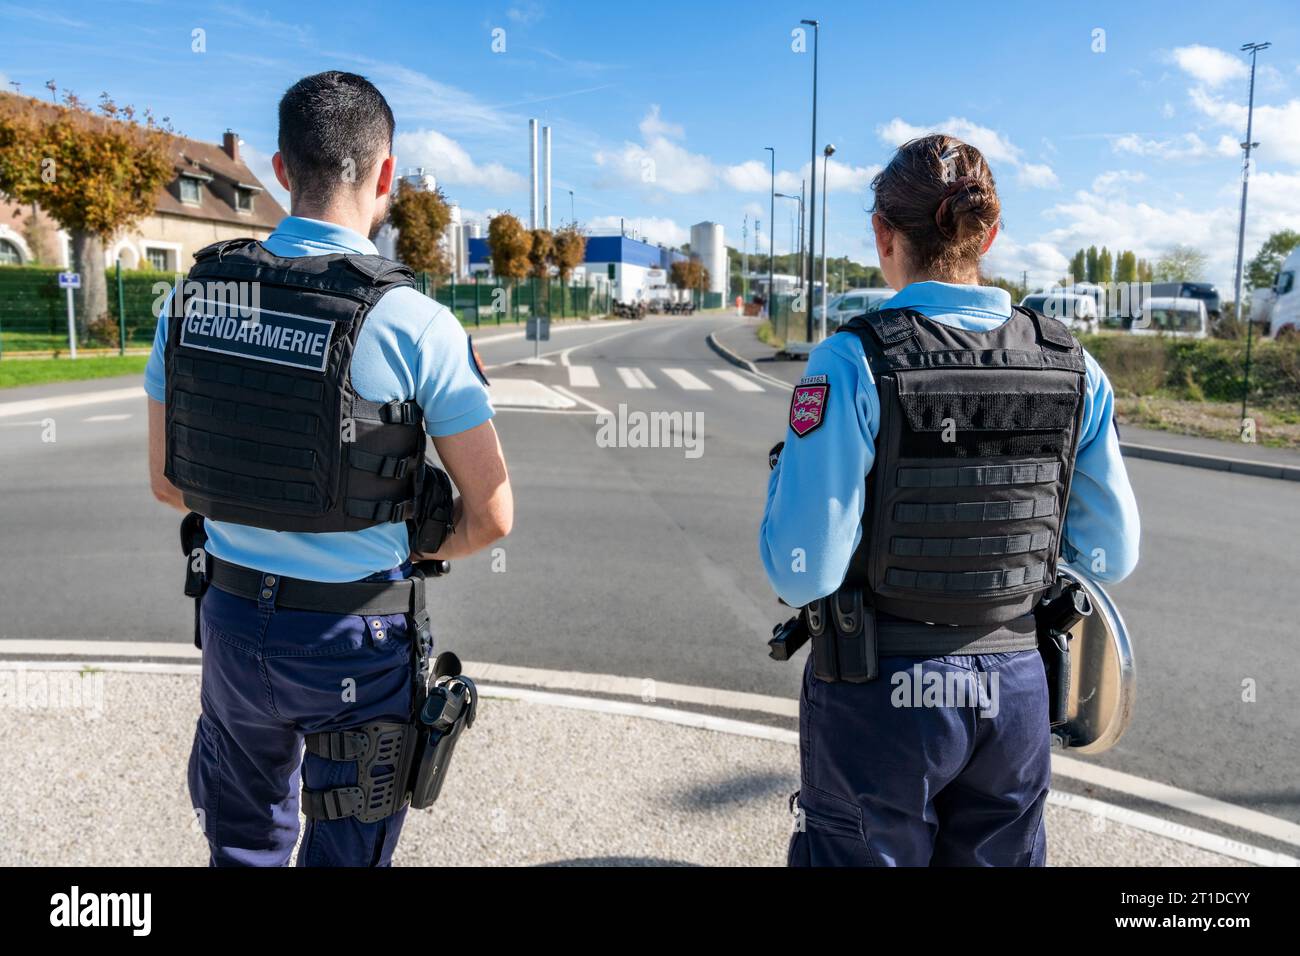 Police officers (“gendarmes”) carrying out a roadside check at a traffic circle Stock Photo